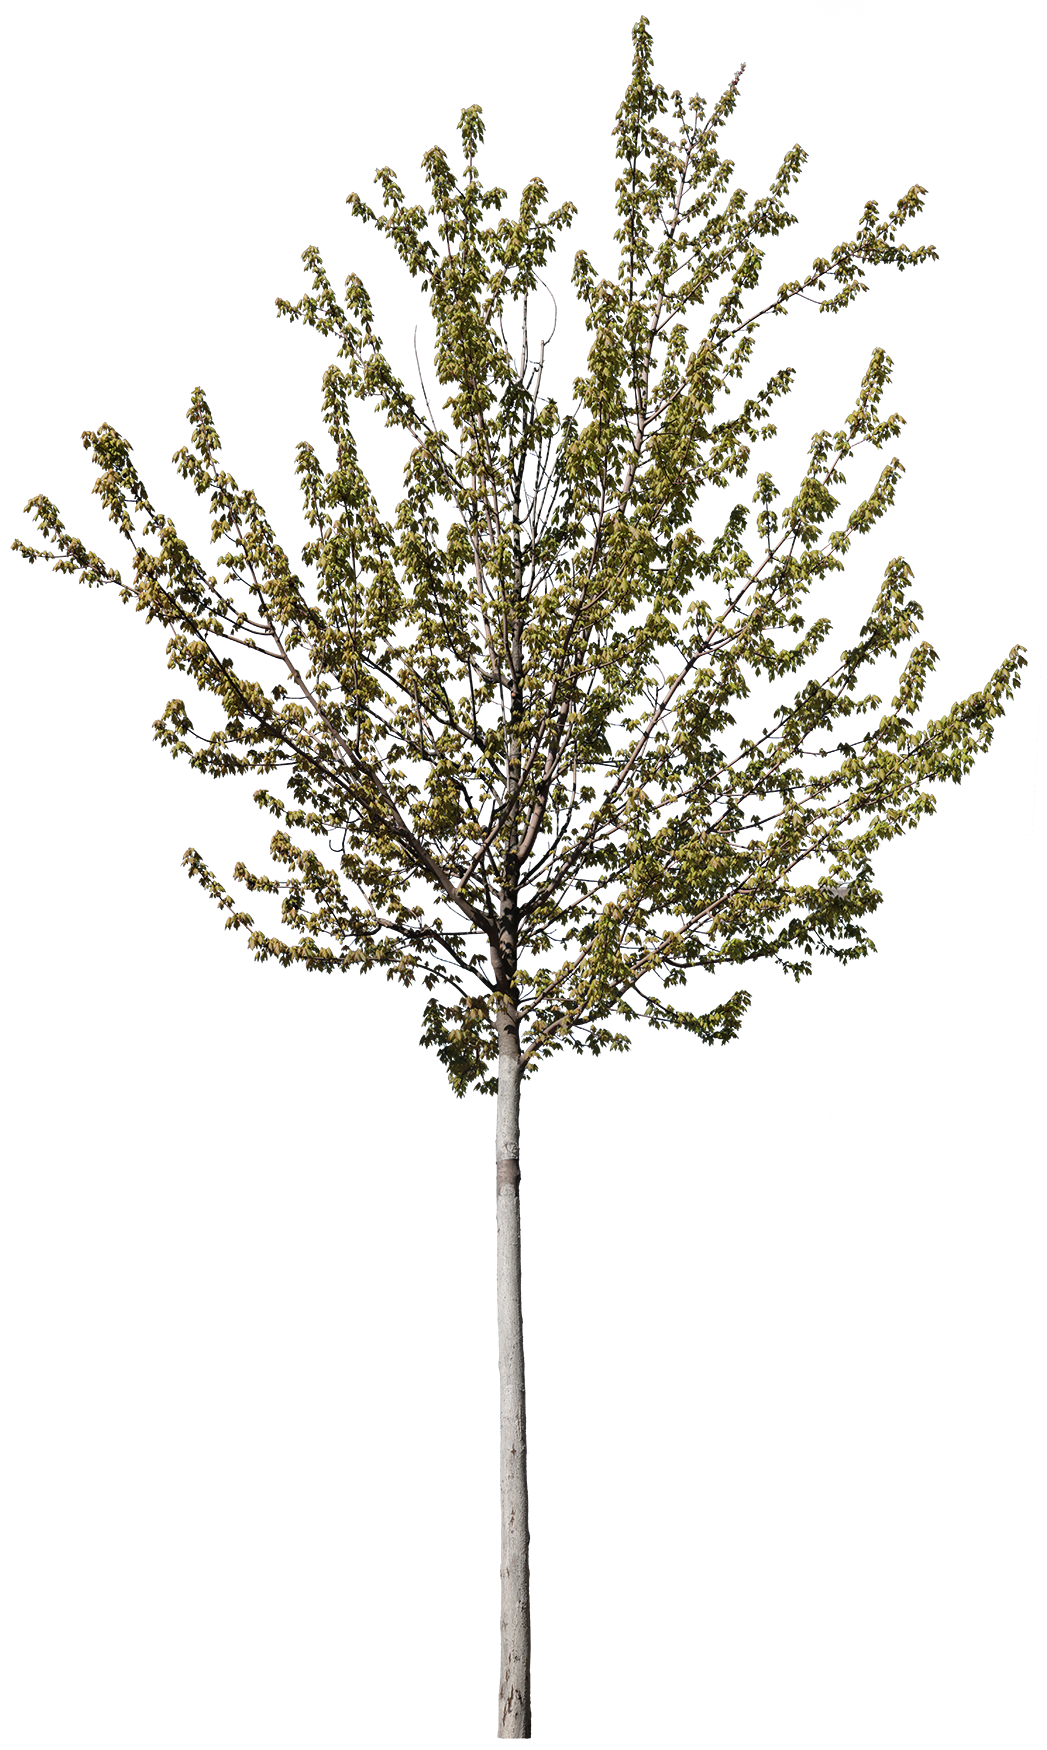 Acer platanoides 2 - cutout trees